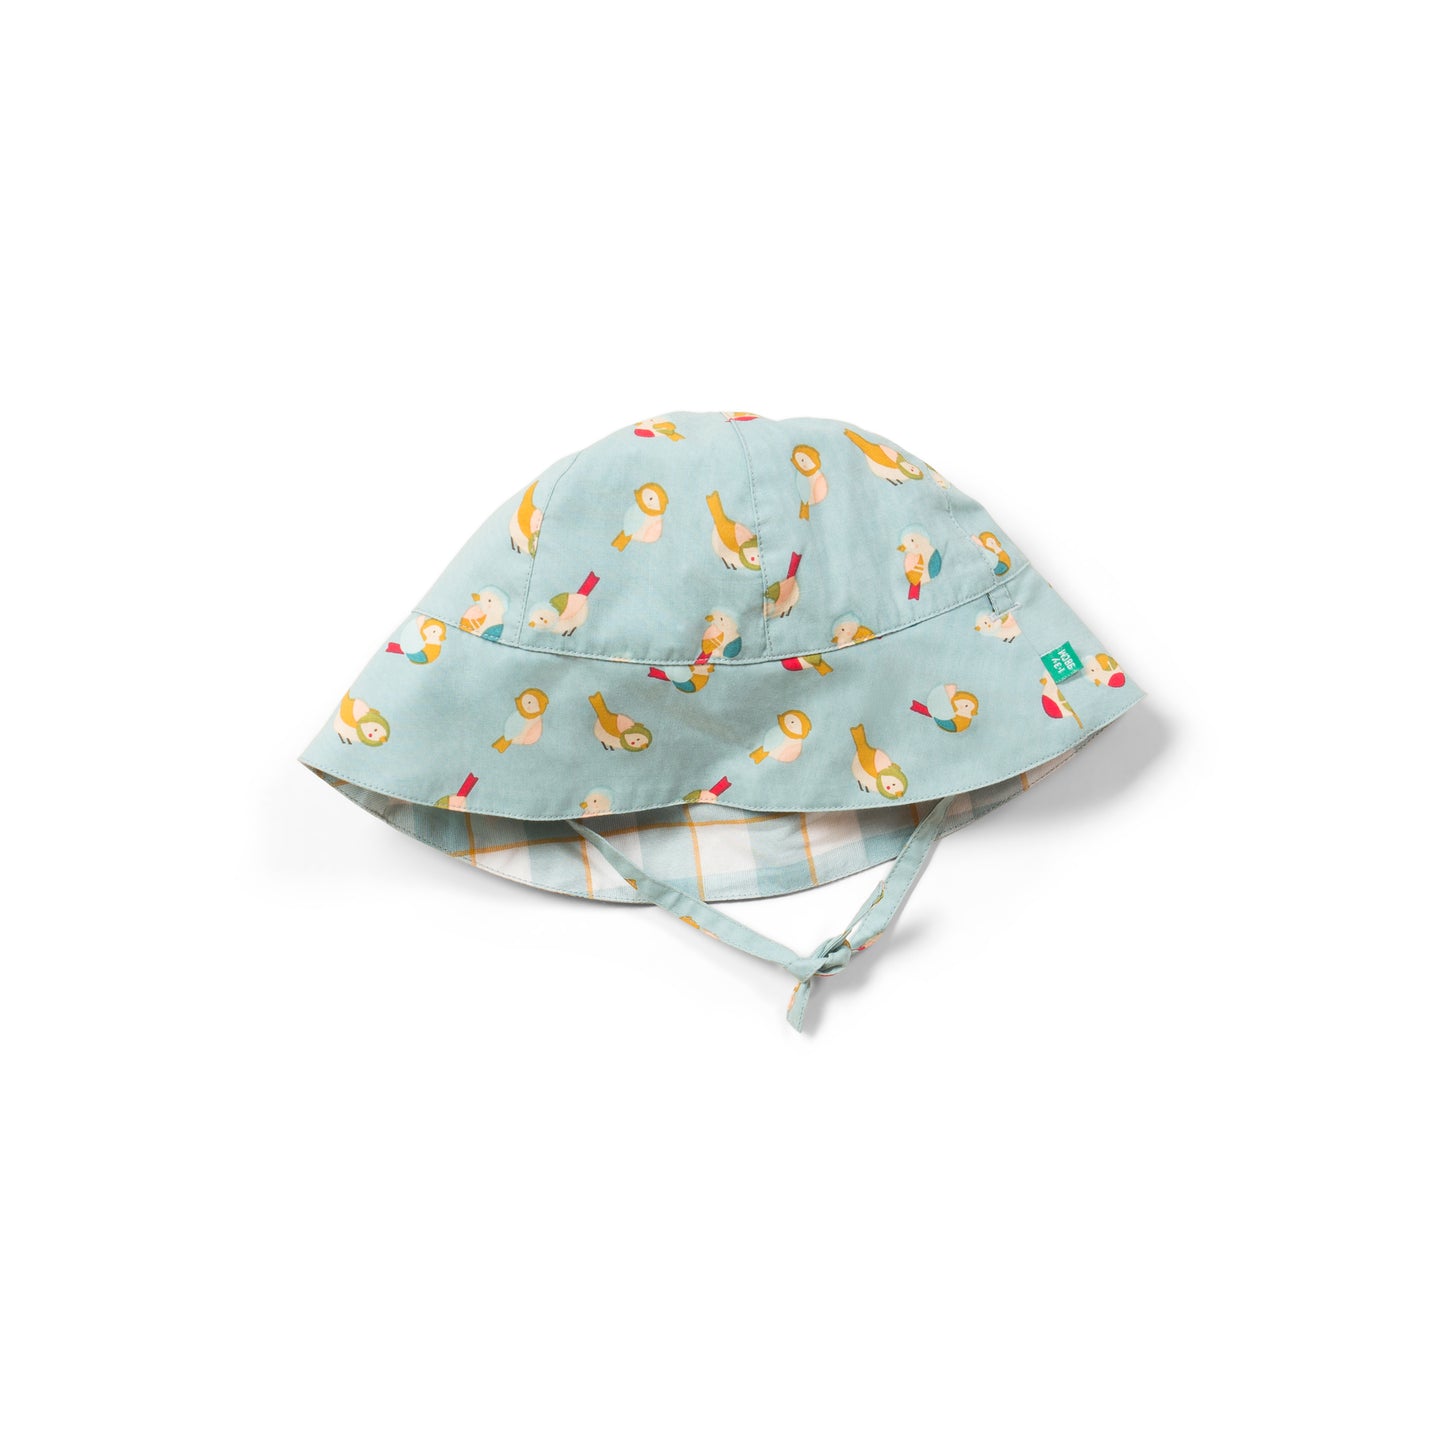 reversible sunhat in rainbow birds print and pale blue check by little green radicals at whippersnappersonline